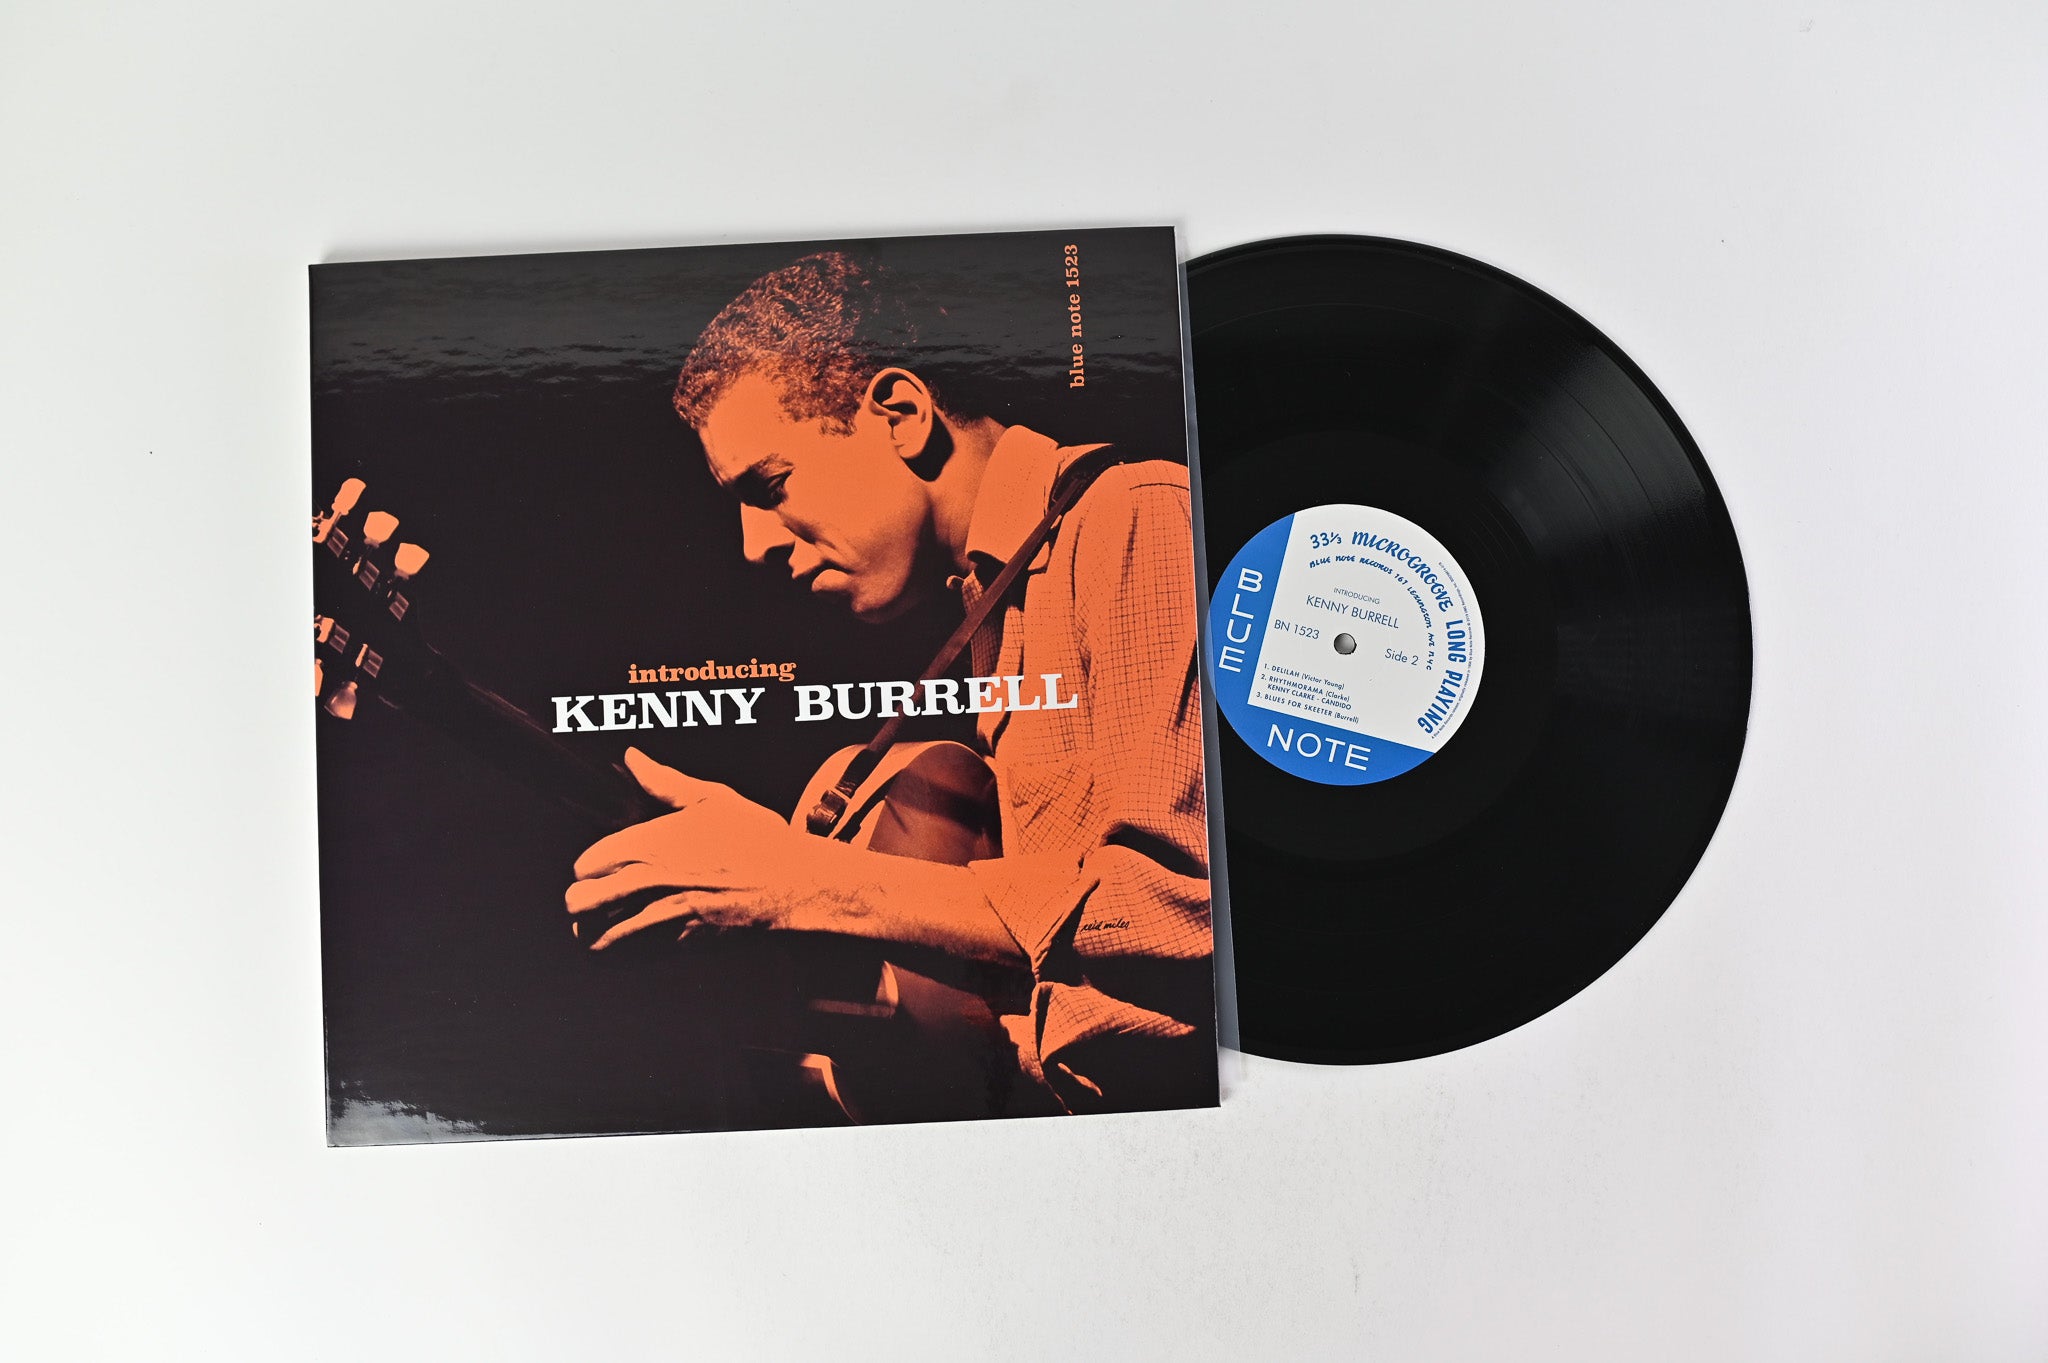 Kenny Burrell - Introducing Kenny Burrell on Blue Note Tone Poet Series